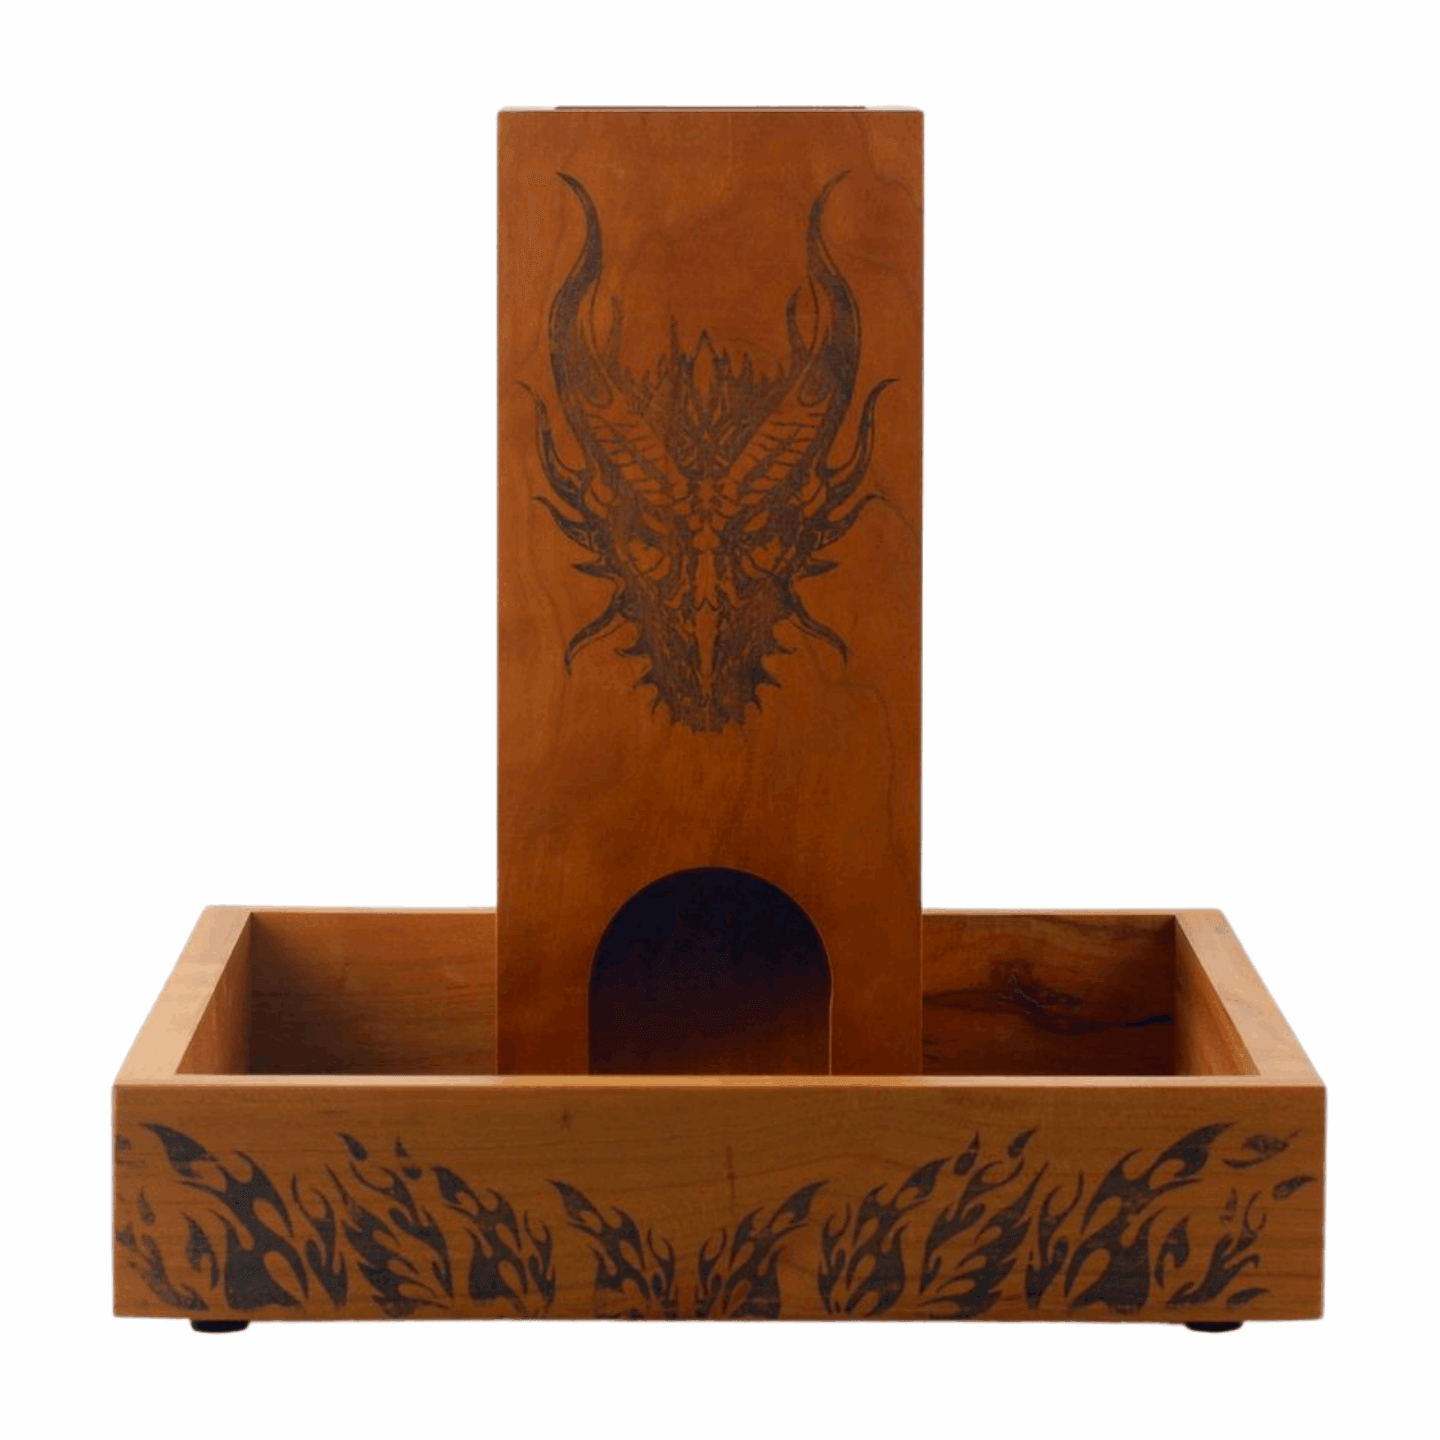 Large Cherry Wood Dice Tray with Flame Design for Tabletop Gaming - Dragon Armor Games